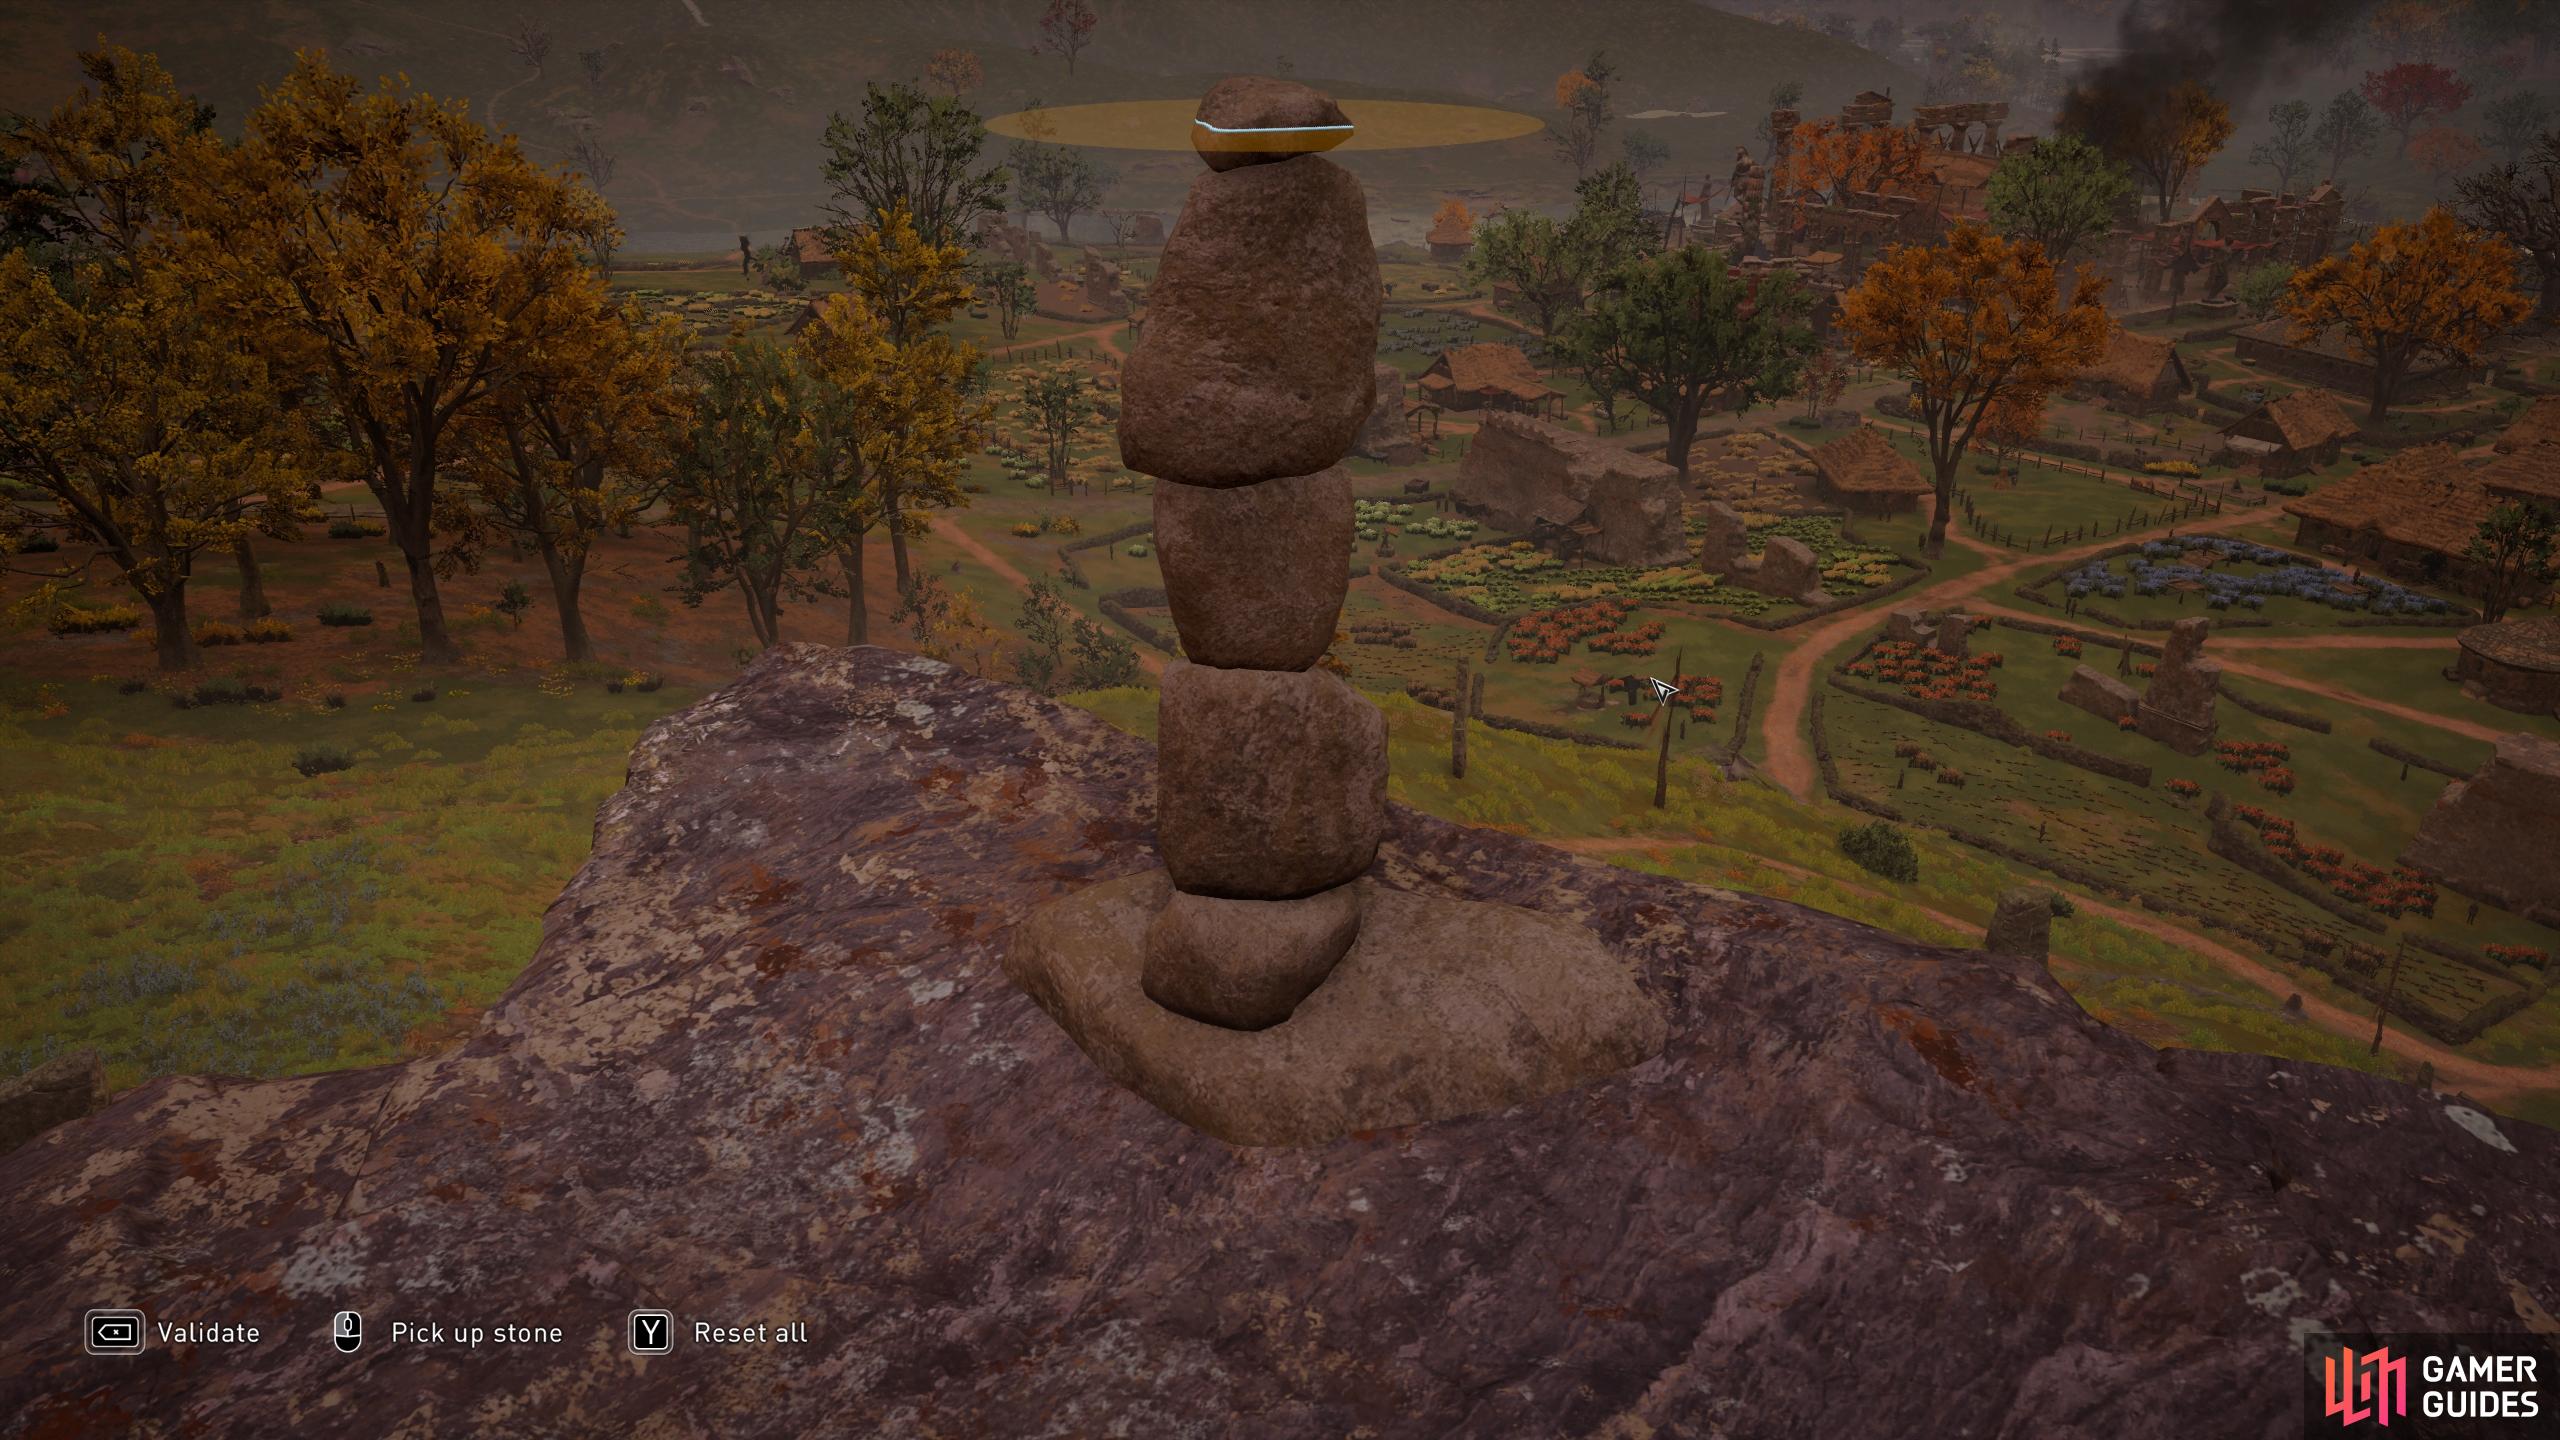 Youll need to play around with the stones to get them to balance properly, but this was the most reliable order we could find.